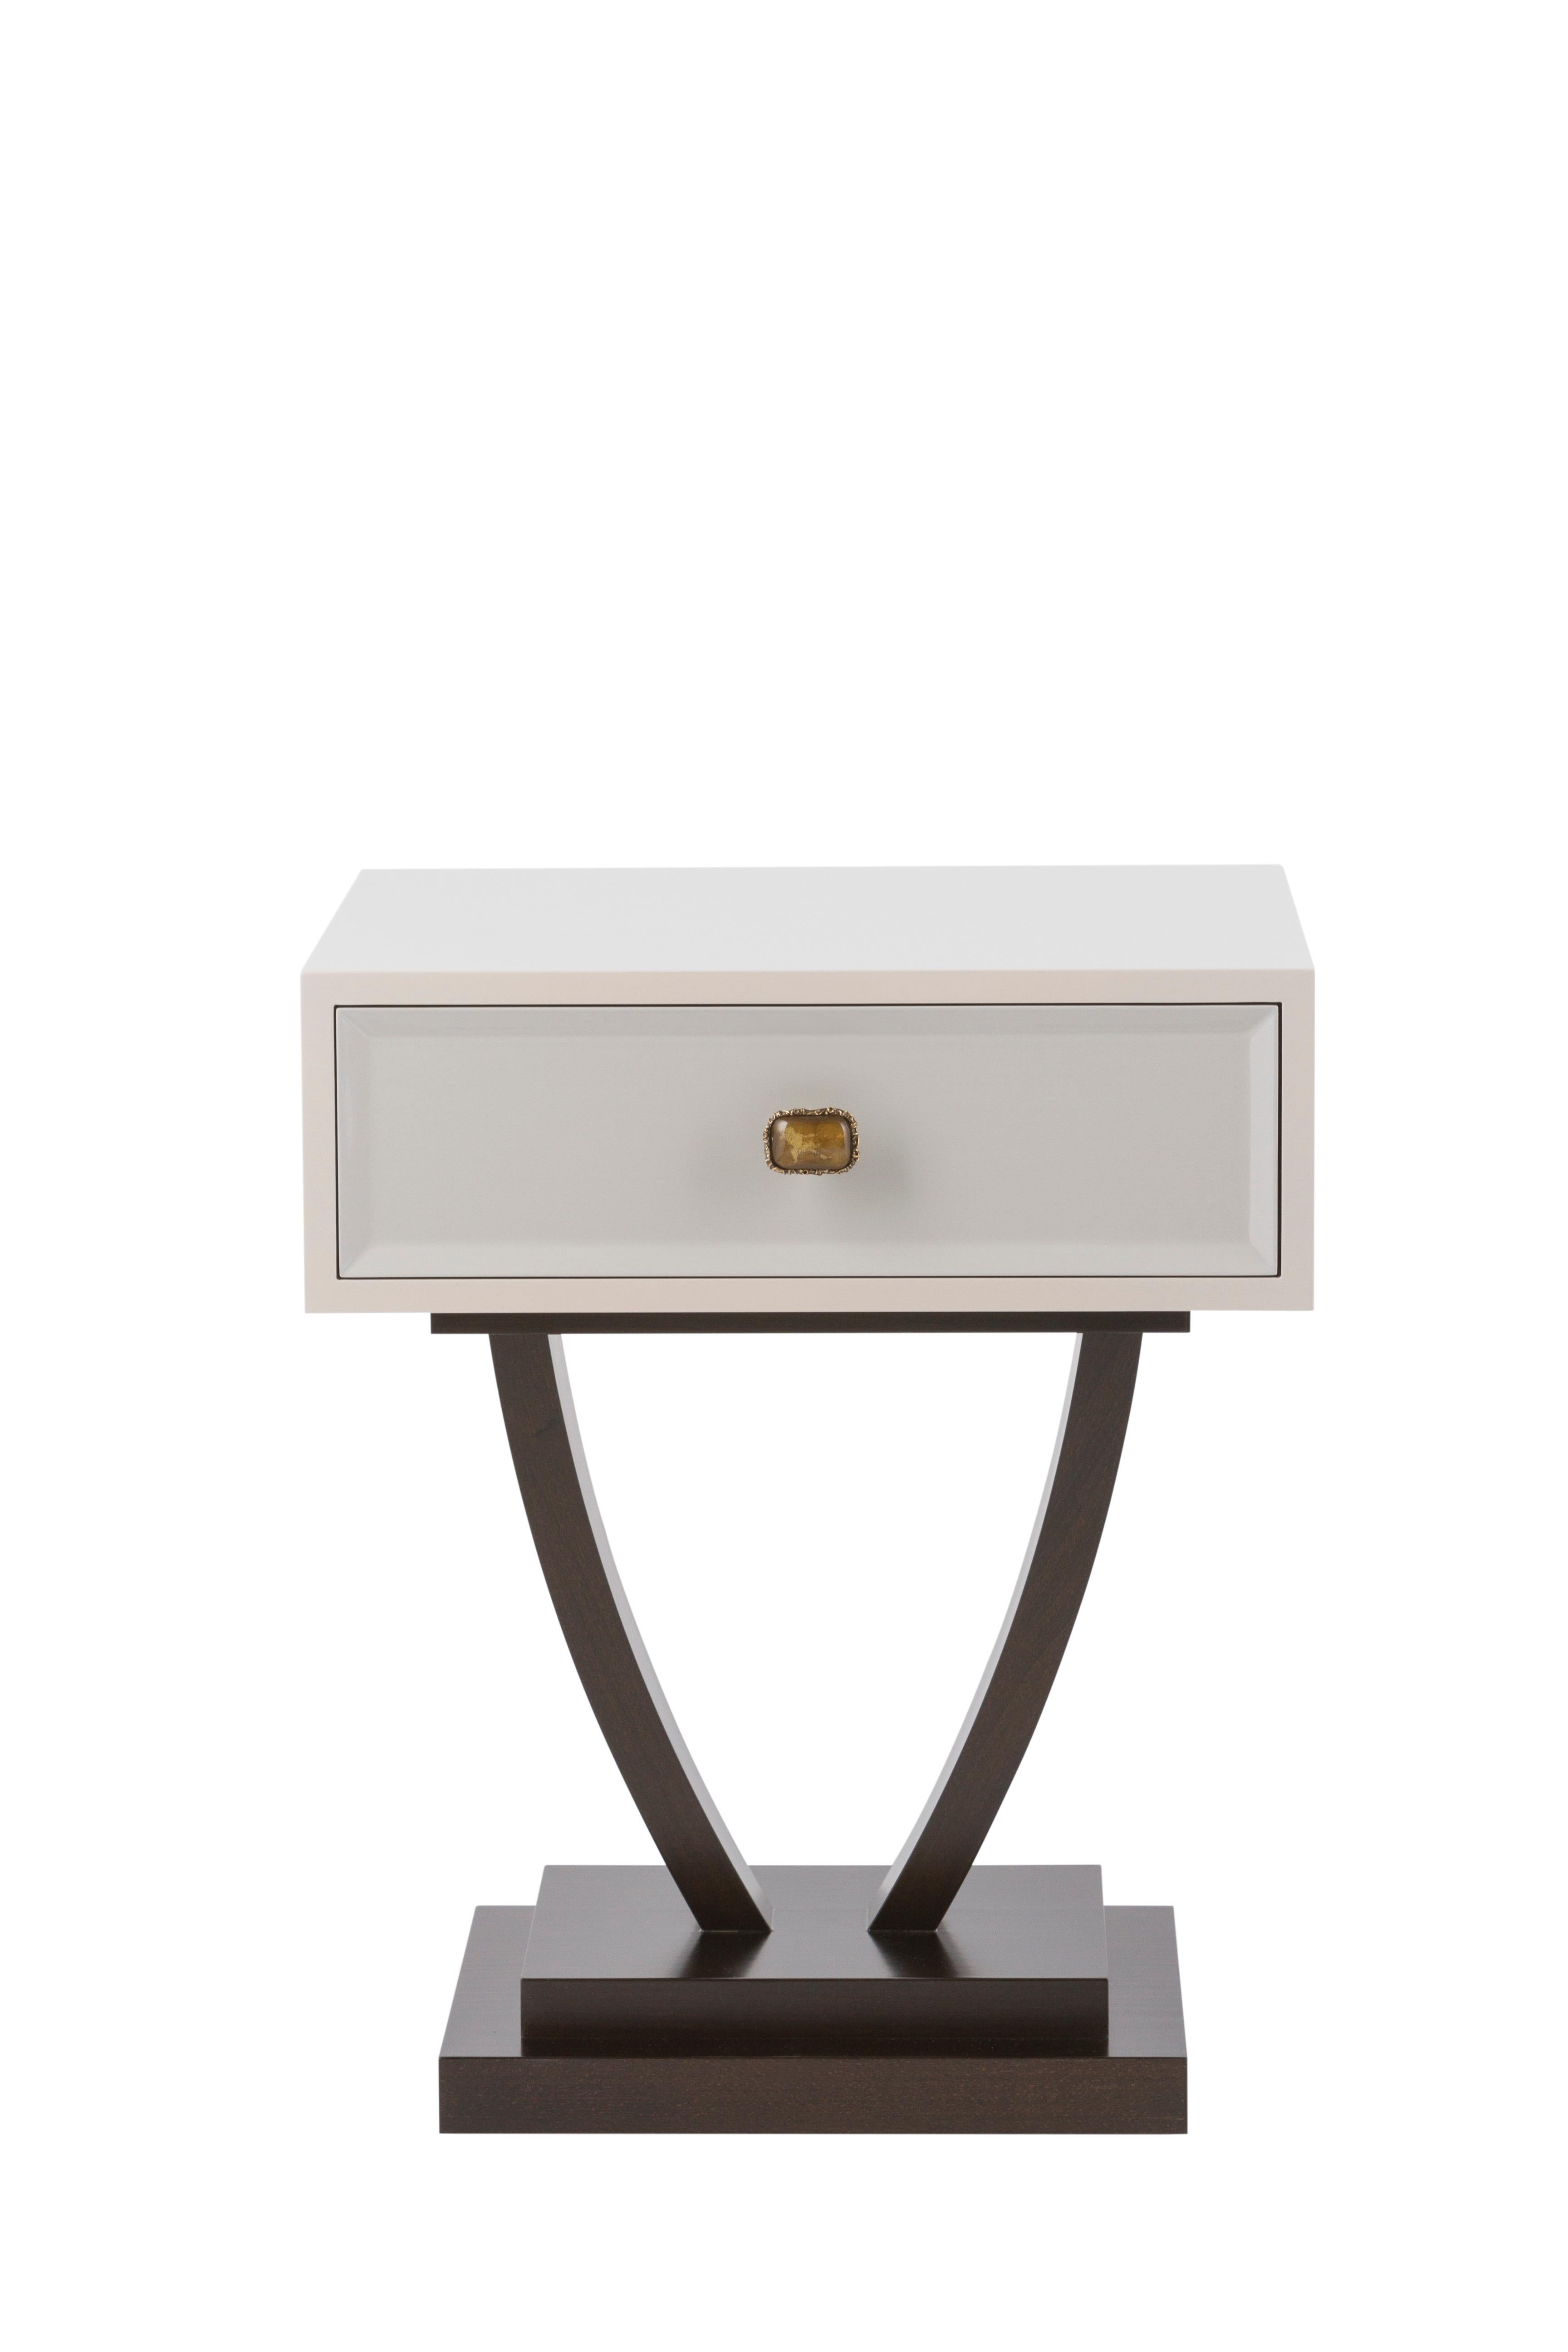 Bett Bedside Table, Modern Collection, Handcrafted in Portugal - Europe by GF Modern.

The Bett bedside table offers a timeless design for your living area. Bett is a wooden bedside table with a drawer lacquered in beige and light-grey, with a